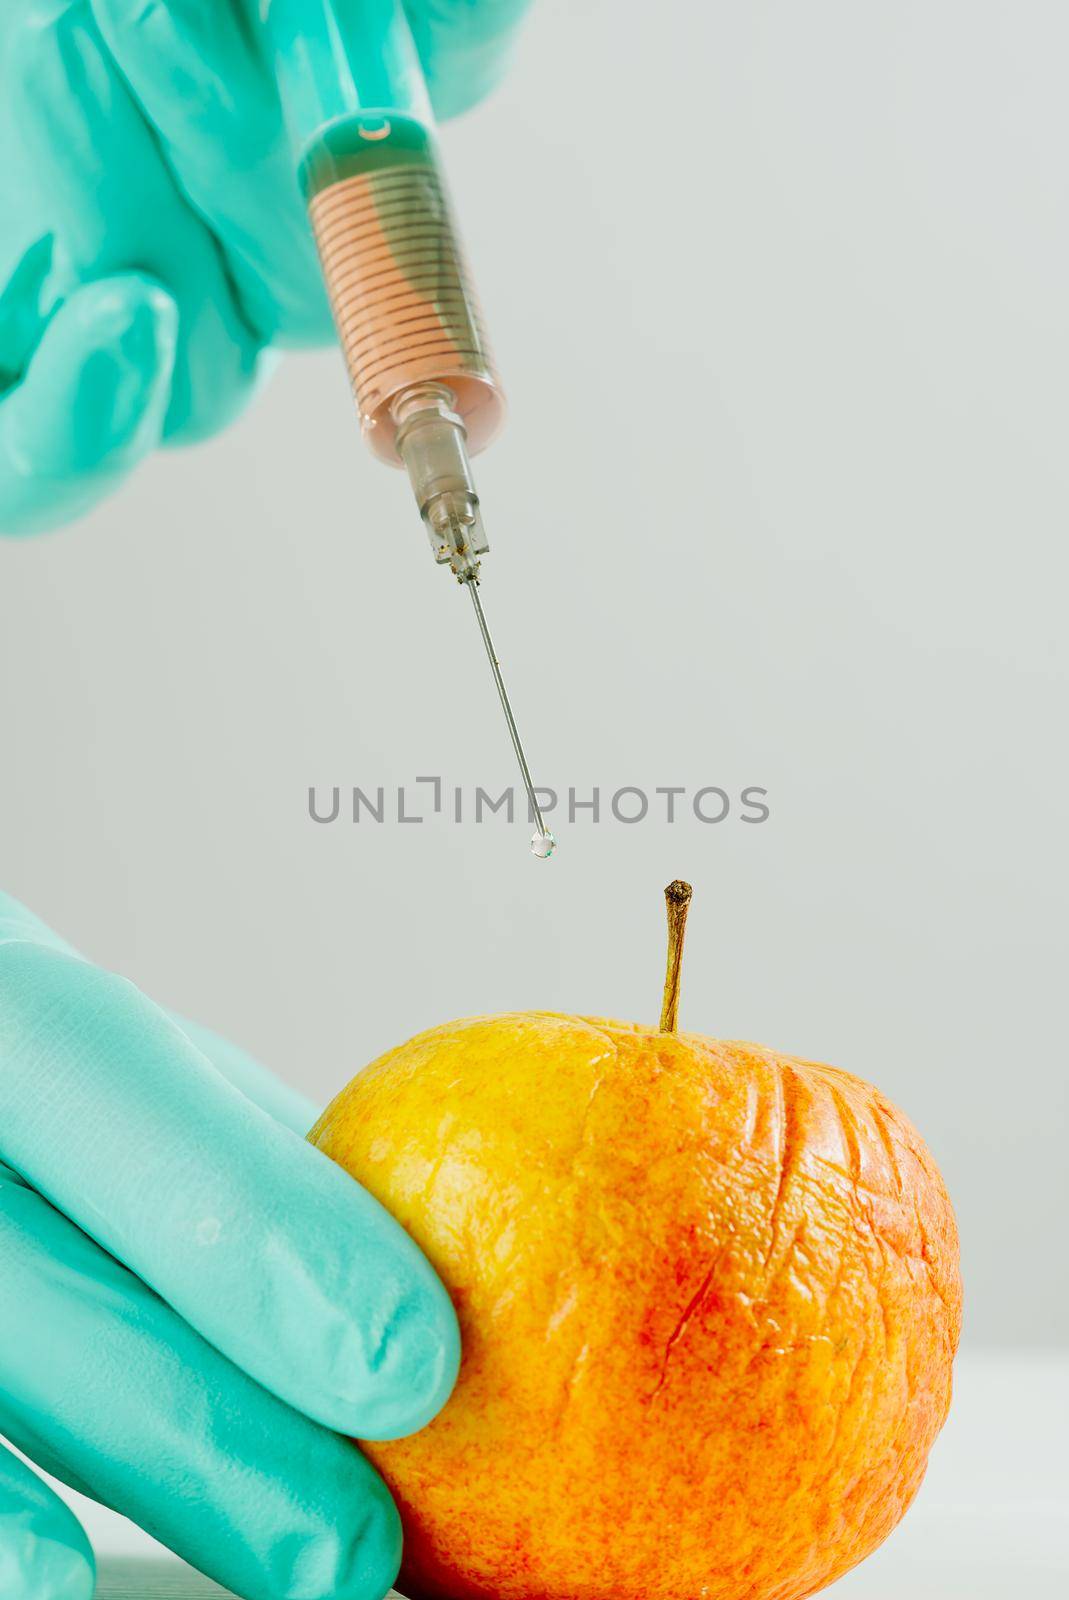 A hand in a medical glove inserts a syringe into apple. Harmful food additives. GMOs Concept by PhotoTime